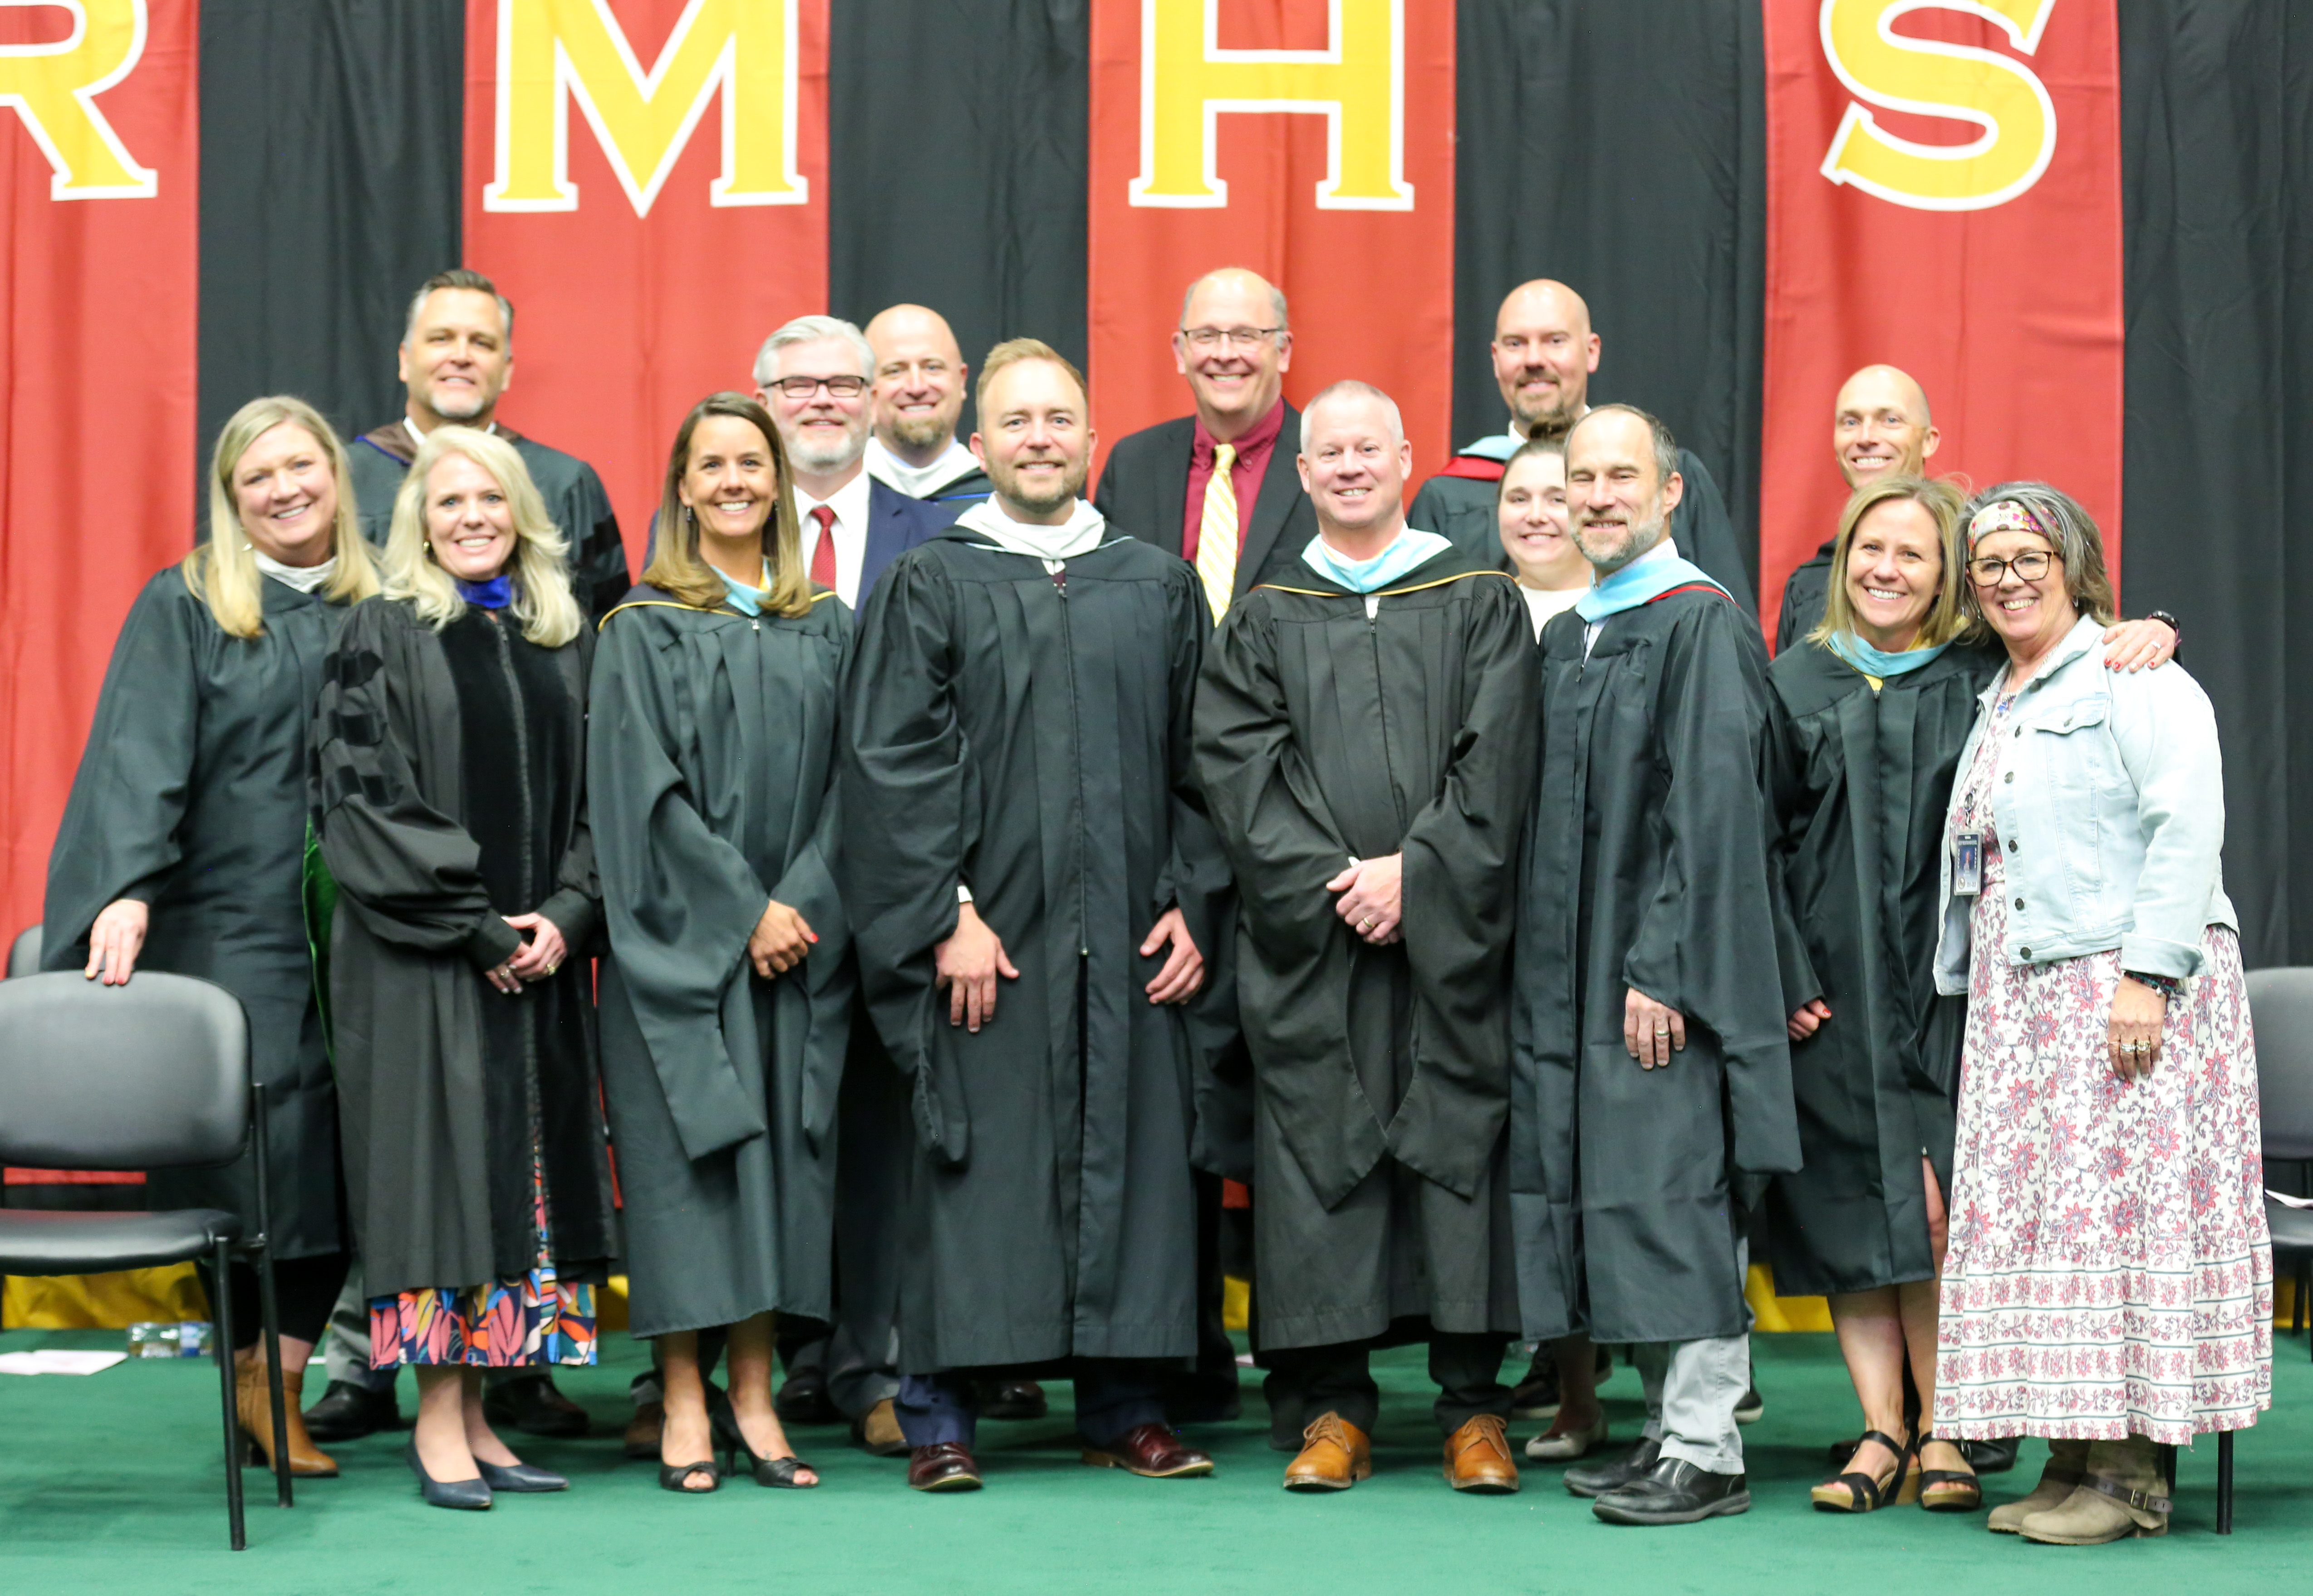 Superintendent Kingsley, Board of Education members and administrators at the Rocky Mountain High School graduation.